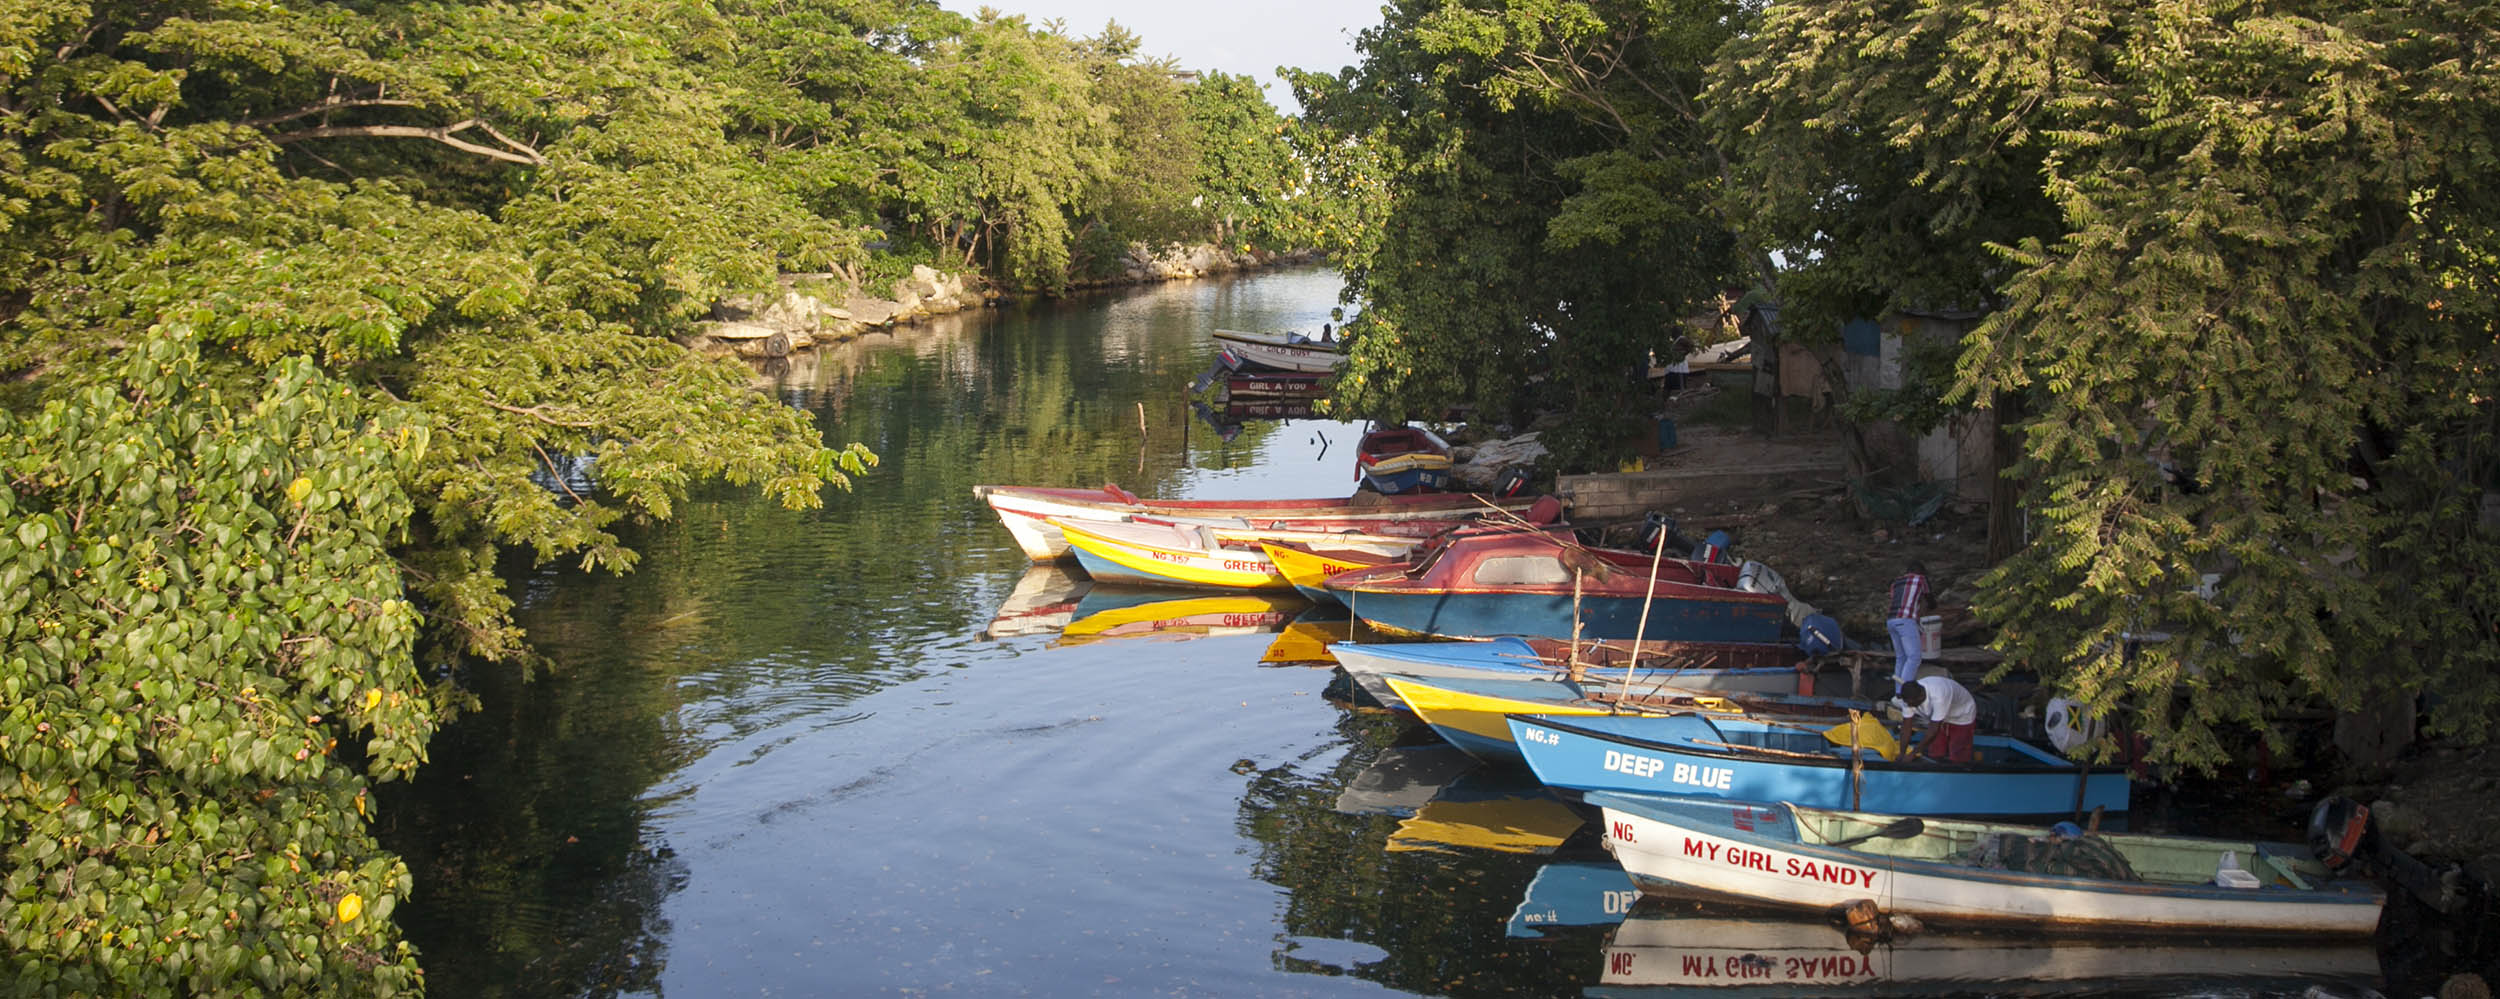 River and Fishing Village, Negril Jamaica